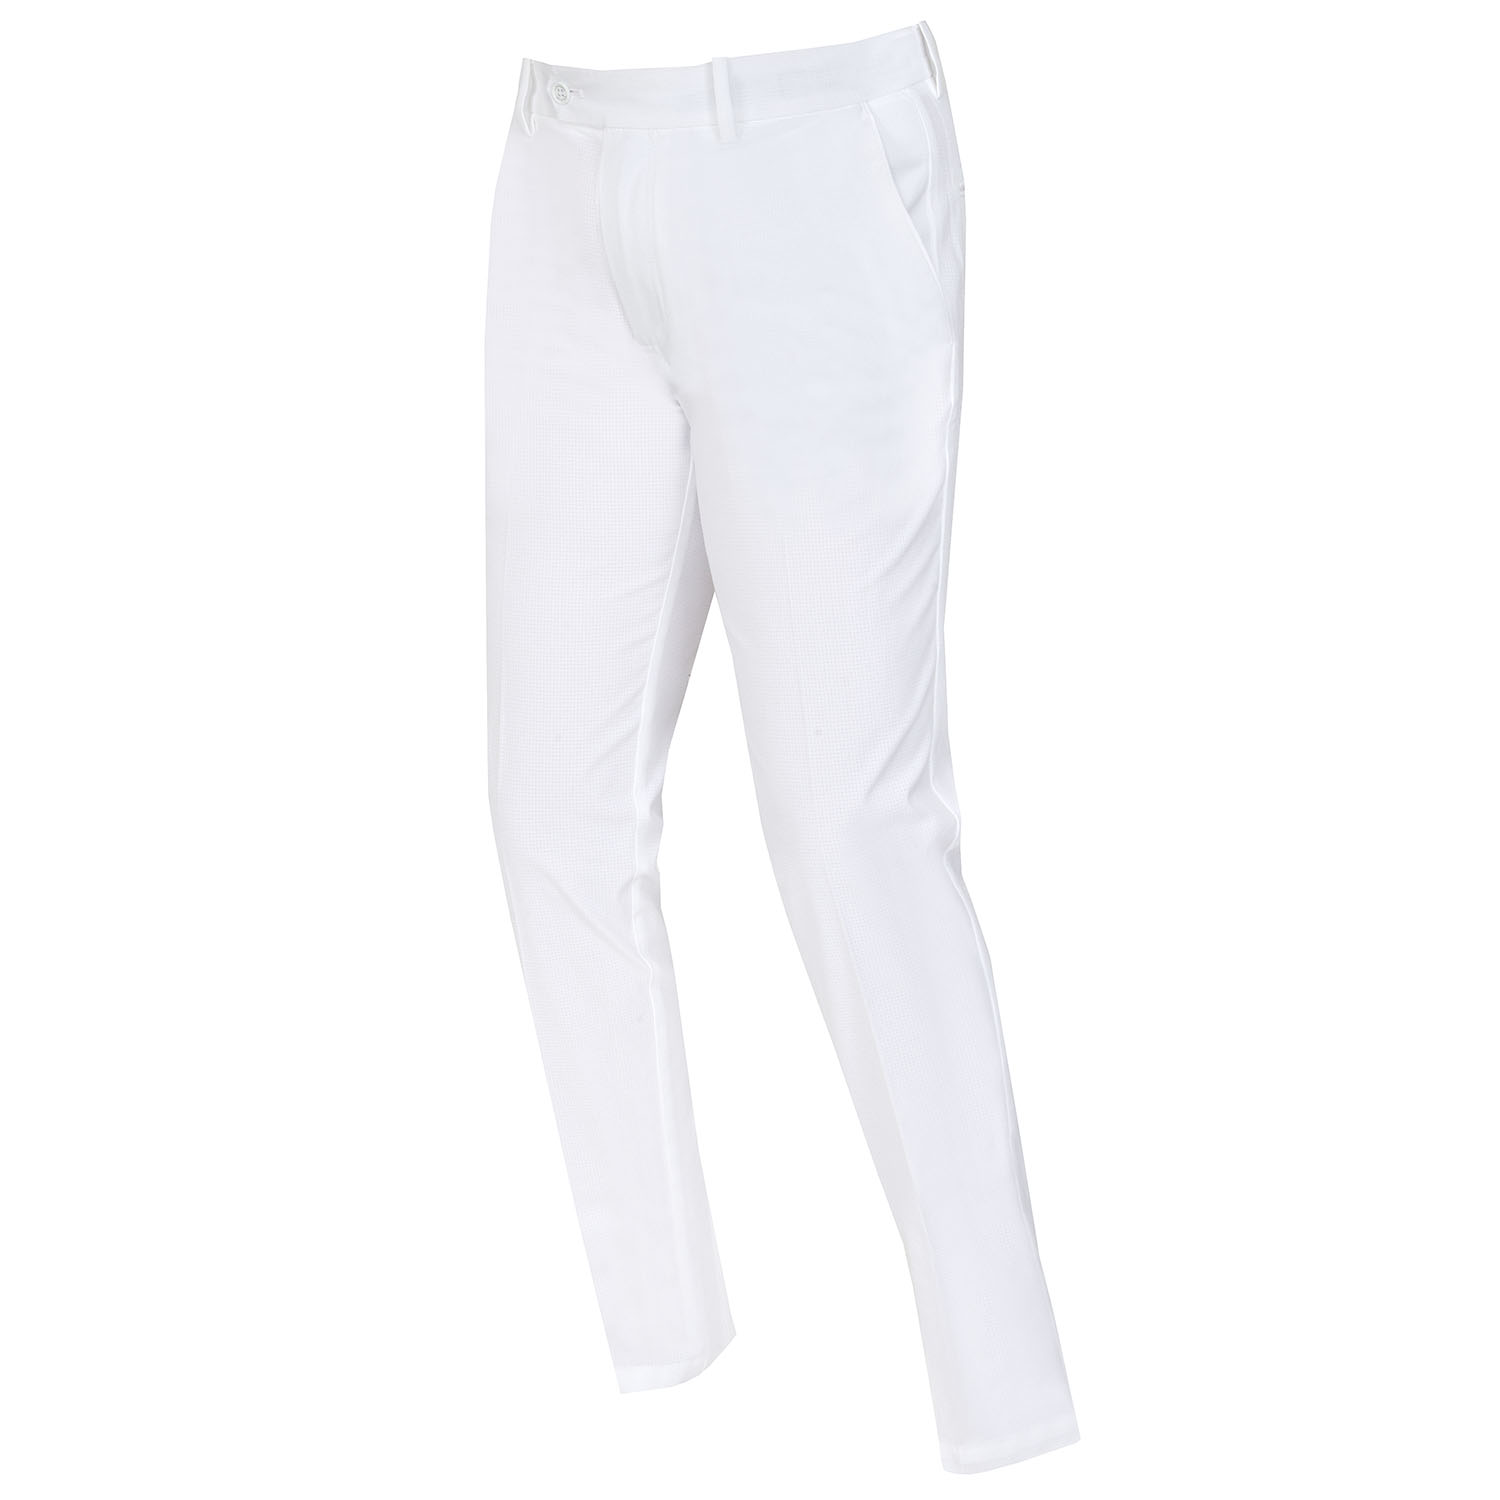 Image of J Lindeberg Vent Golf Trousers